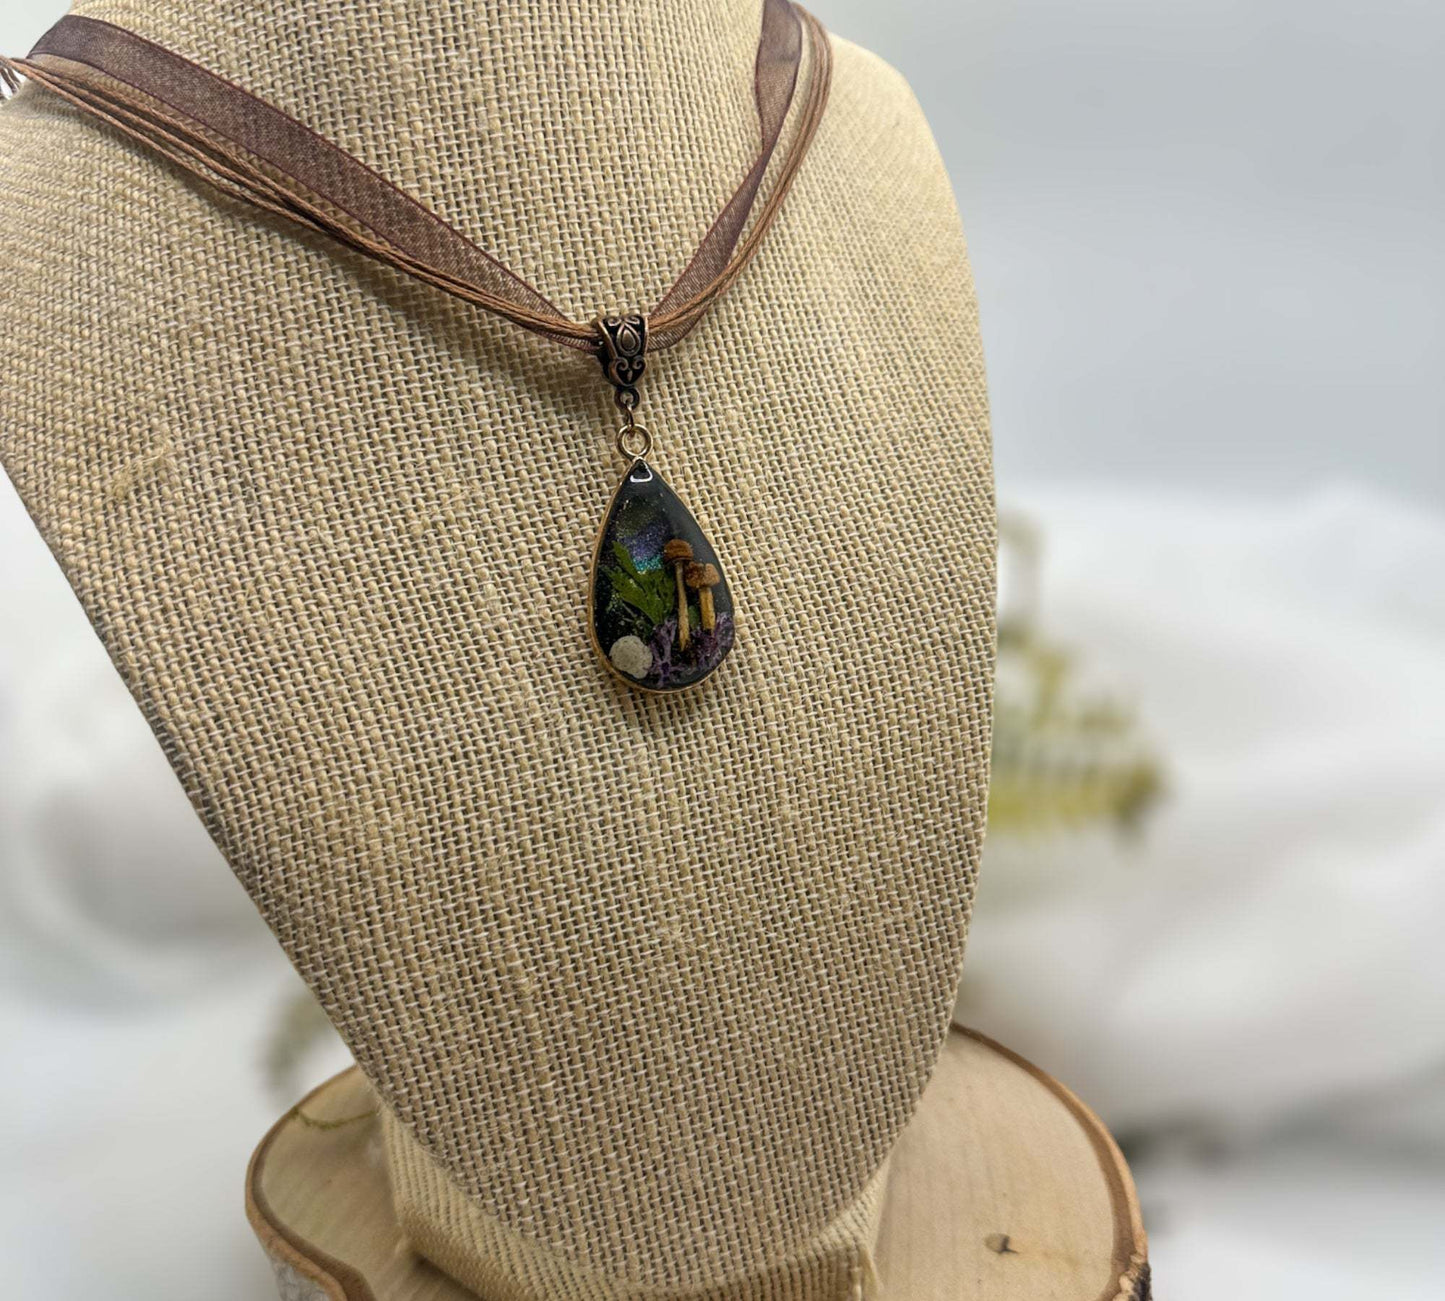 Mini Forest: Teardrop Pendant with Northern Lights and Mushrooms